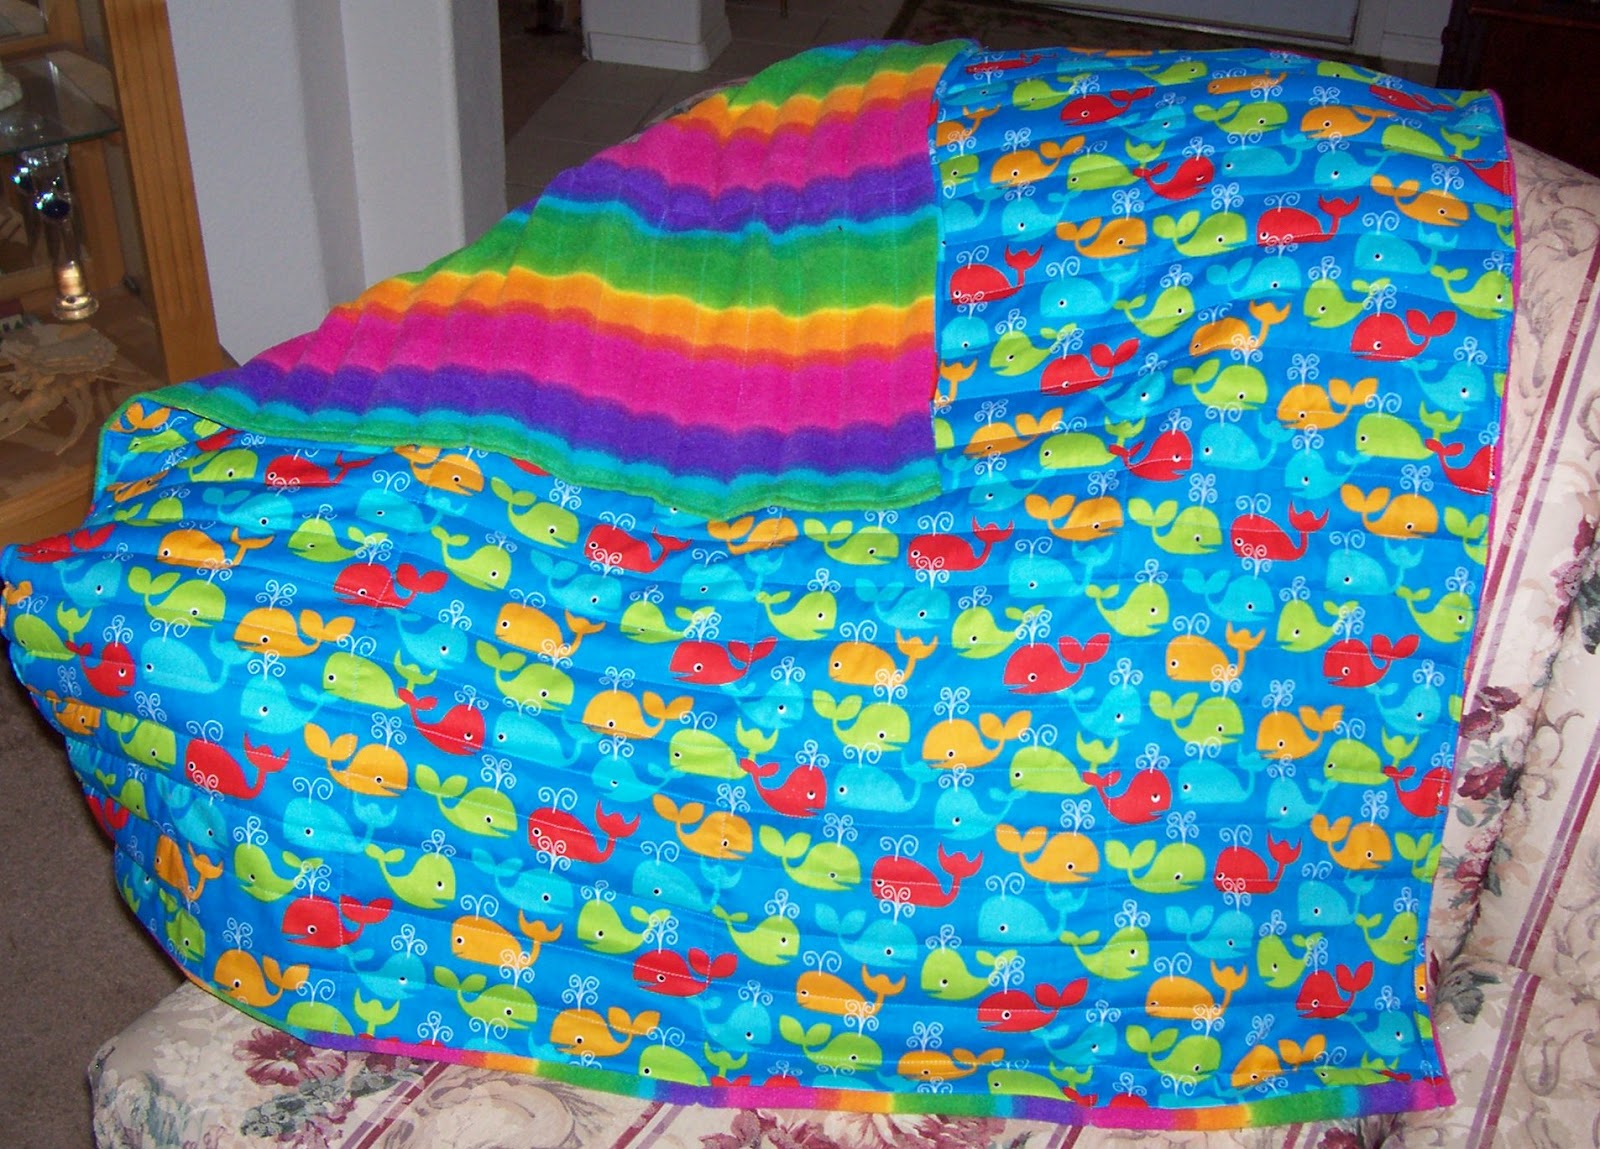 Sweet Creations By Rita: Weighted blanket for Autism